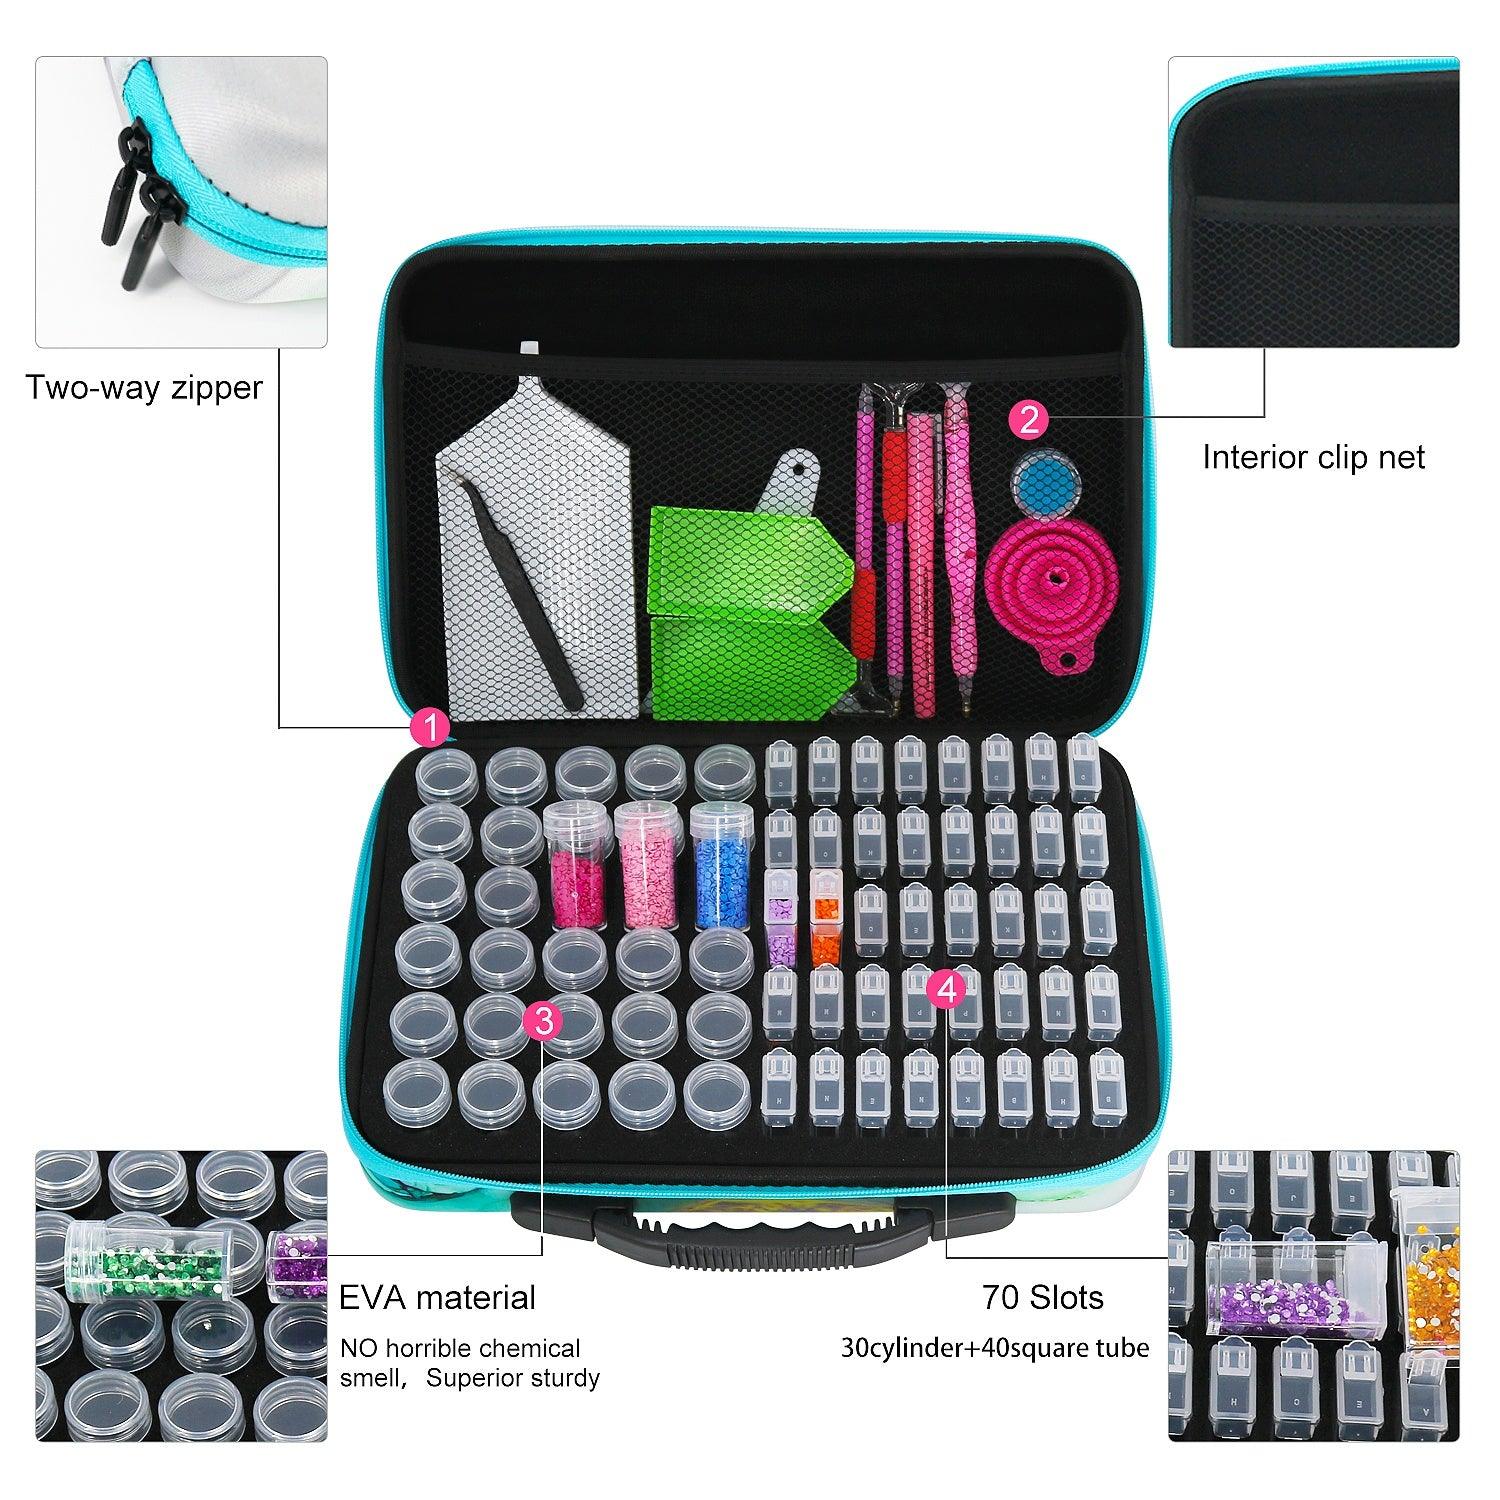 Colored Drawing 87 in 1 Diamond Painting Tool Kits Storage Container